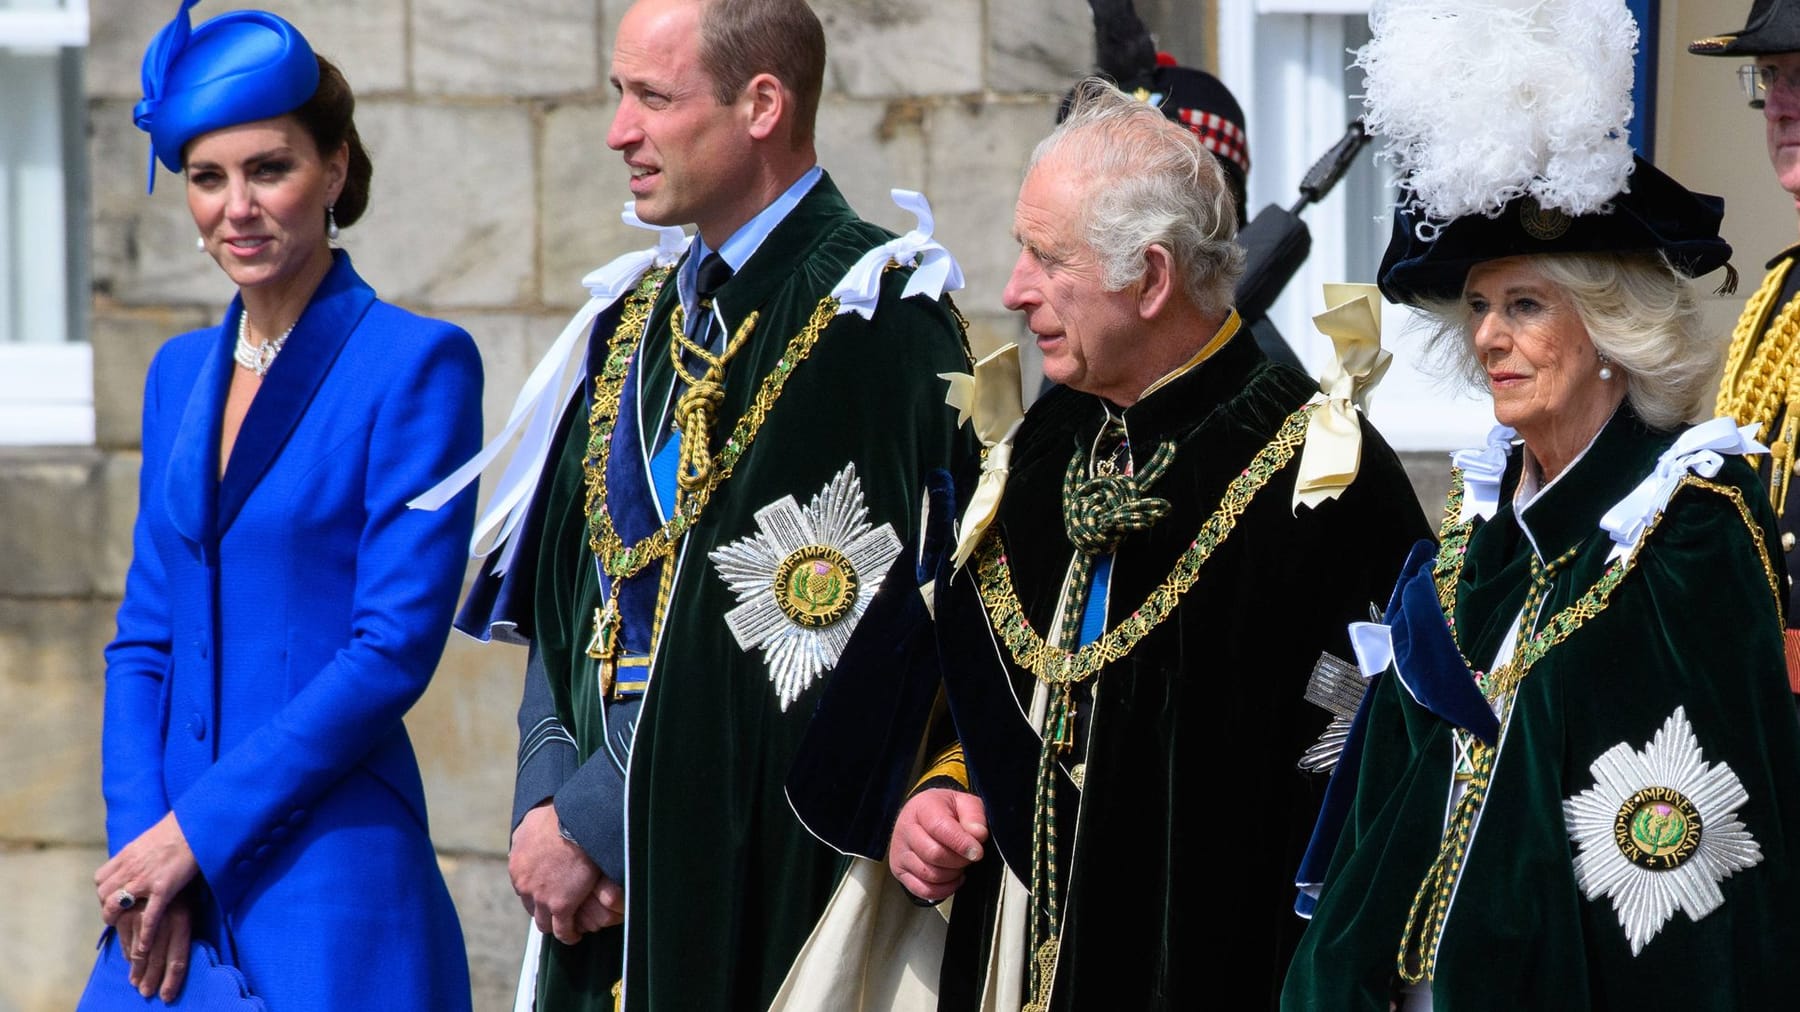 These are the most popular royals